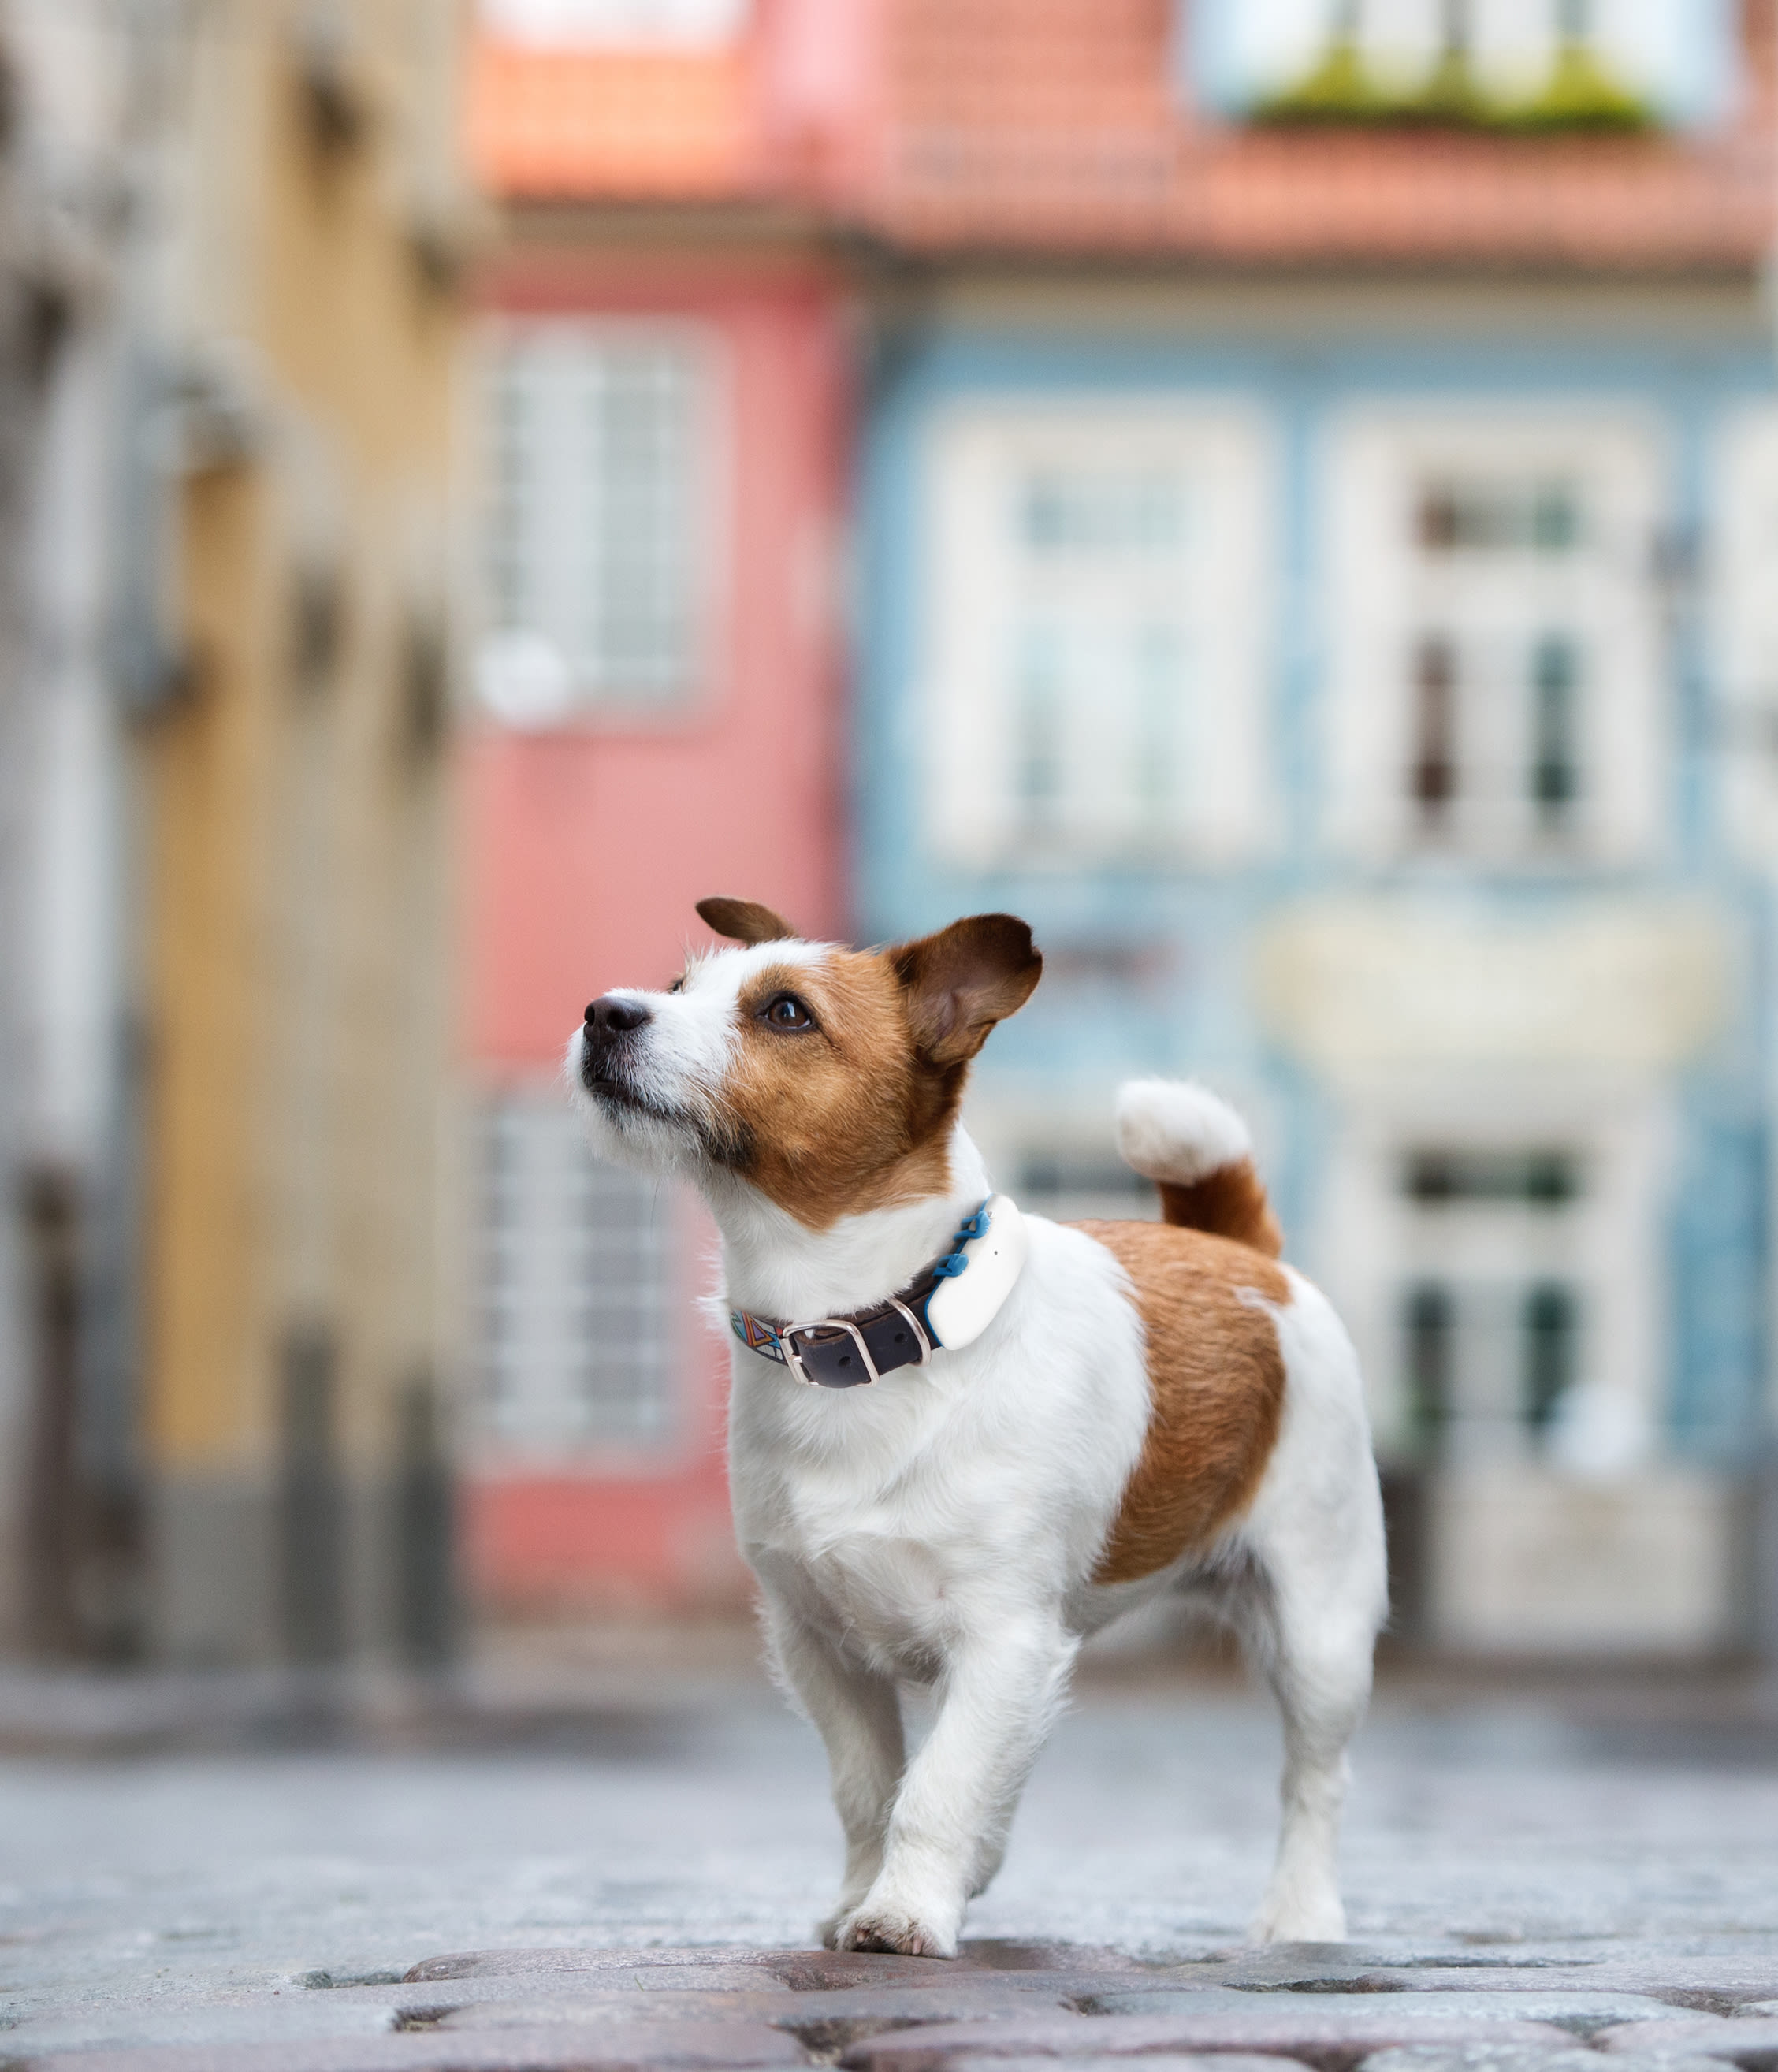 Jack Russell Terrier dog with GPS tracker